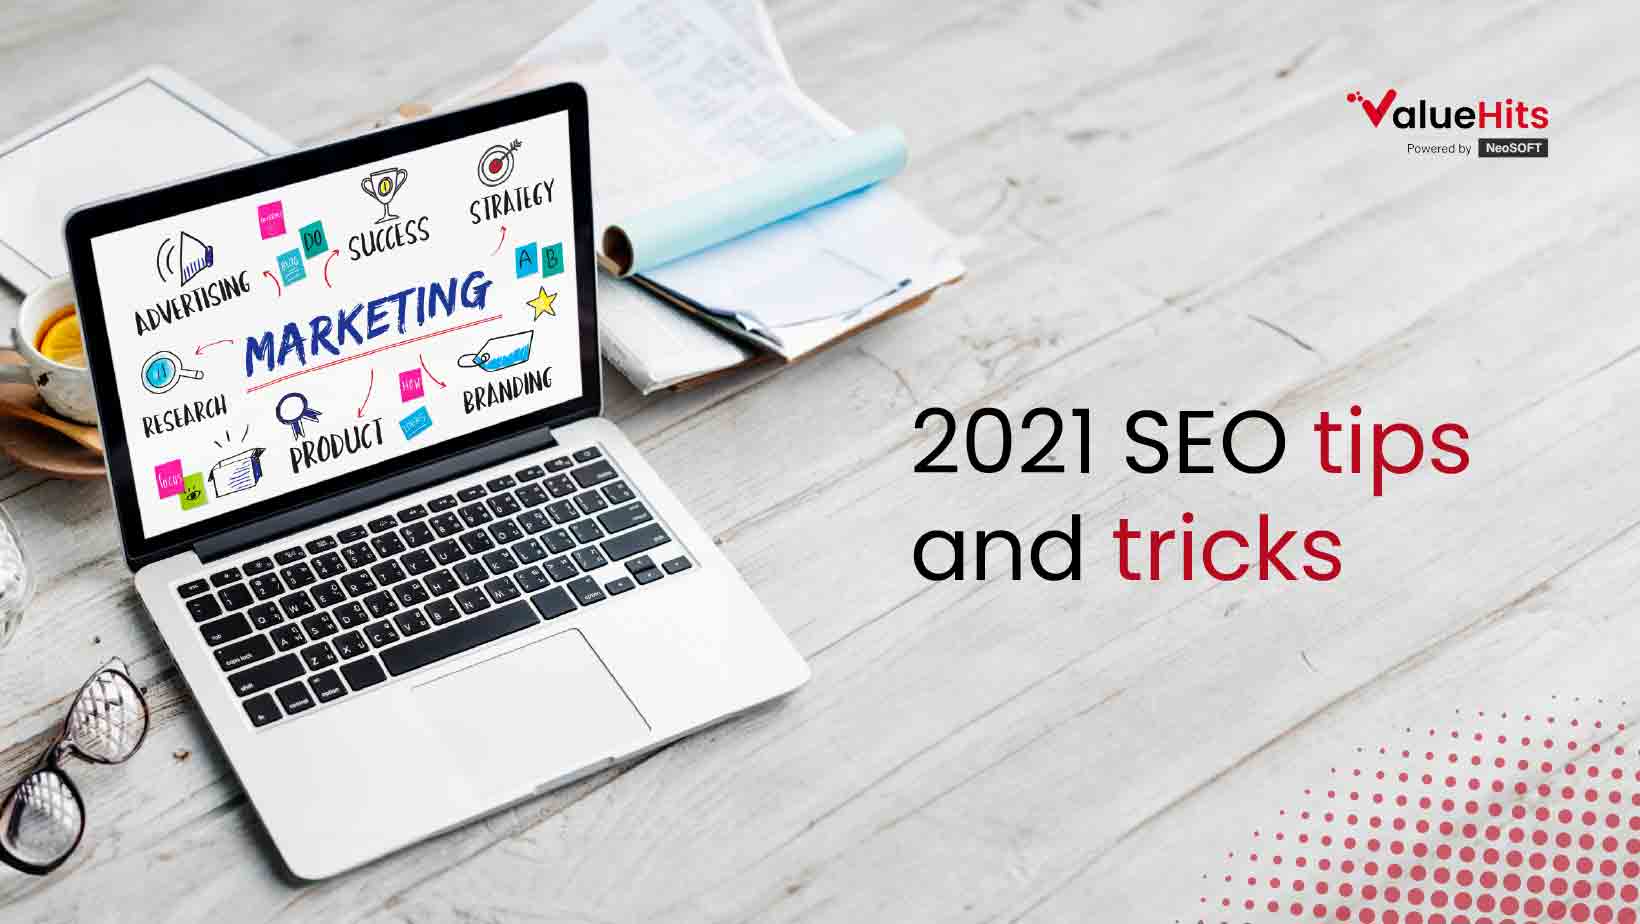 2021 SEO tips and tricks